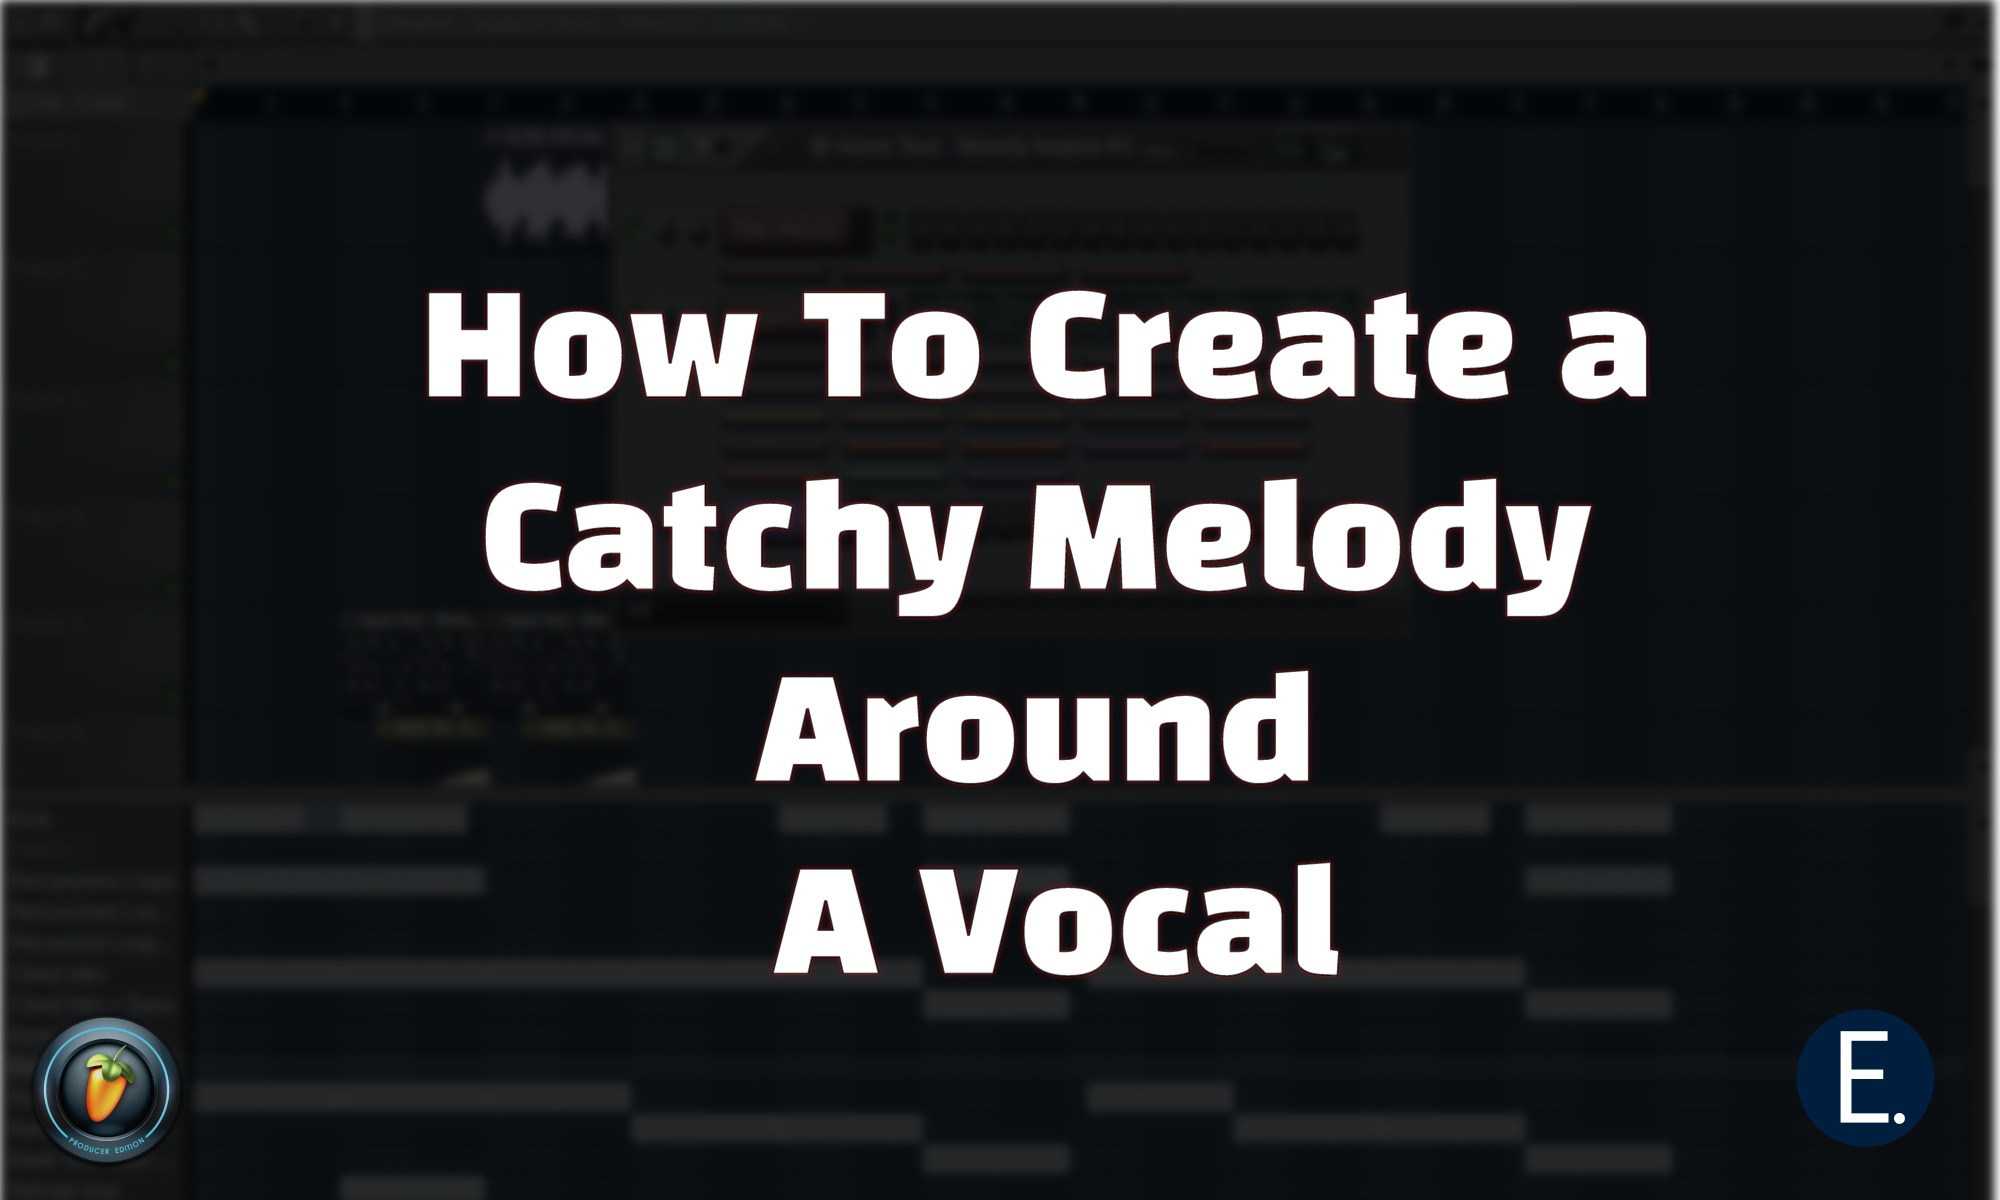 Creating a Catchy Melody Around A Vocal [Video]